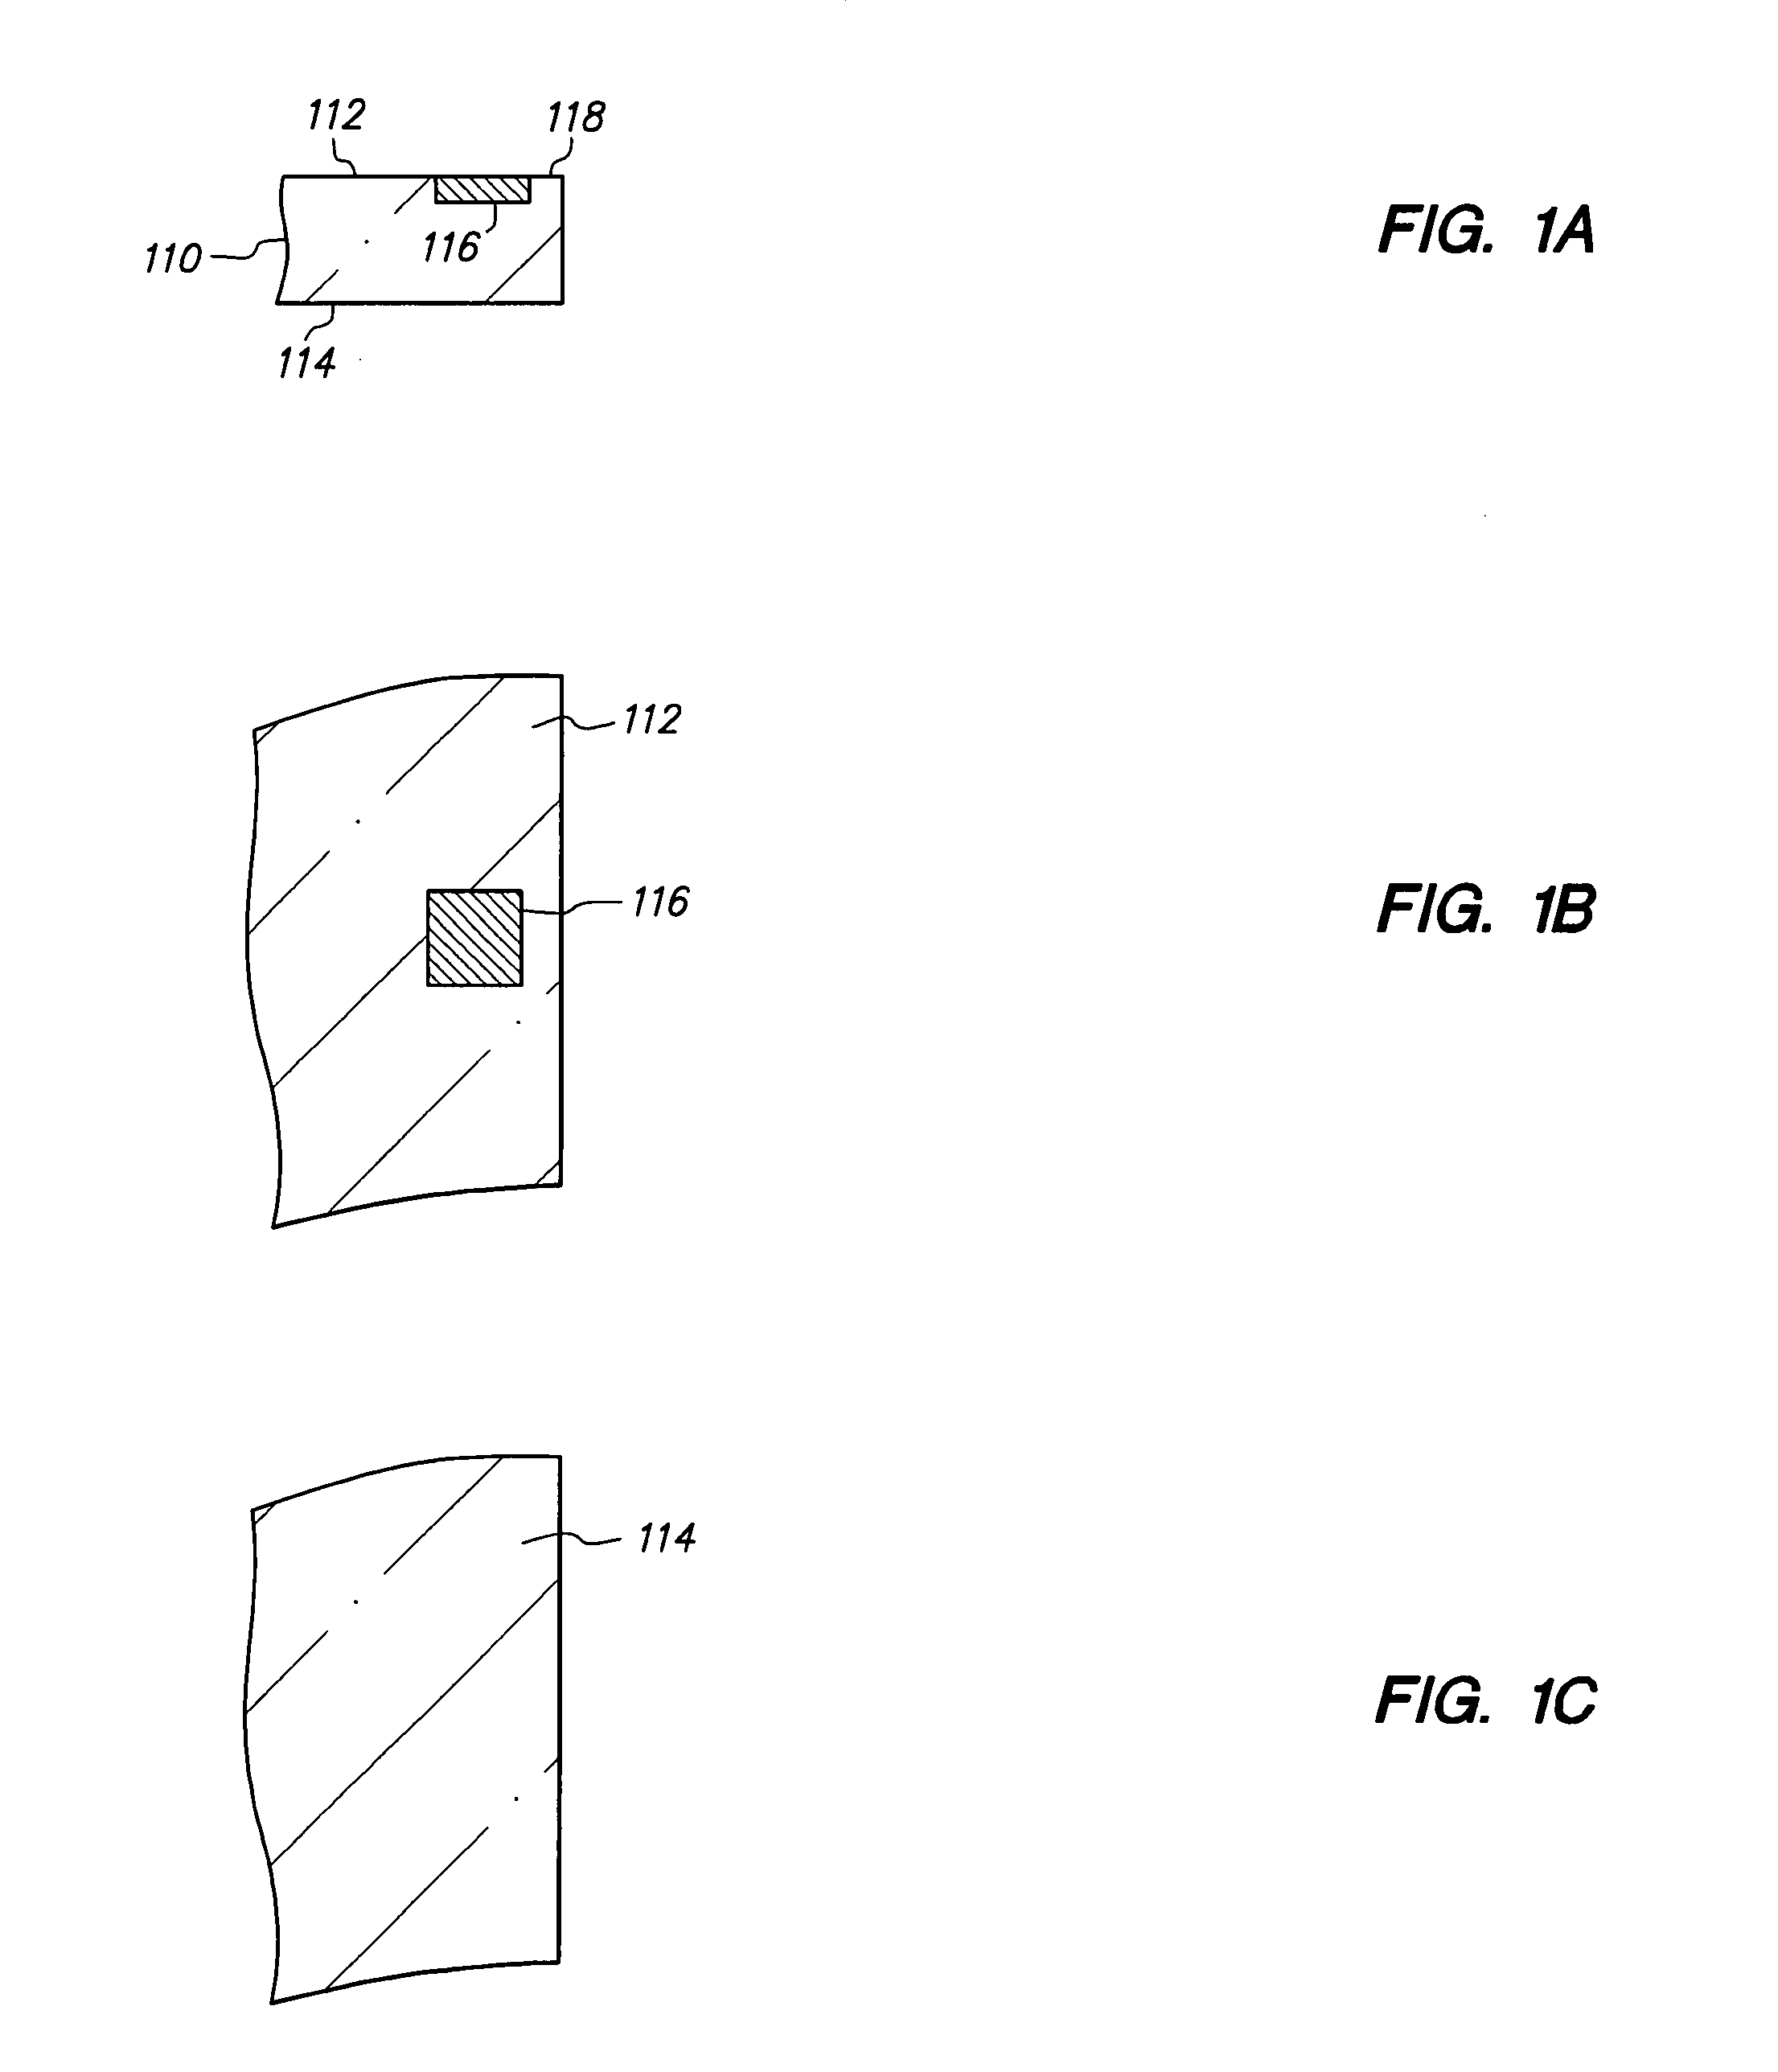 Method of making a semiconductor chip assembly with a bumped terminal, a filler and an insulative base